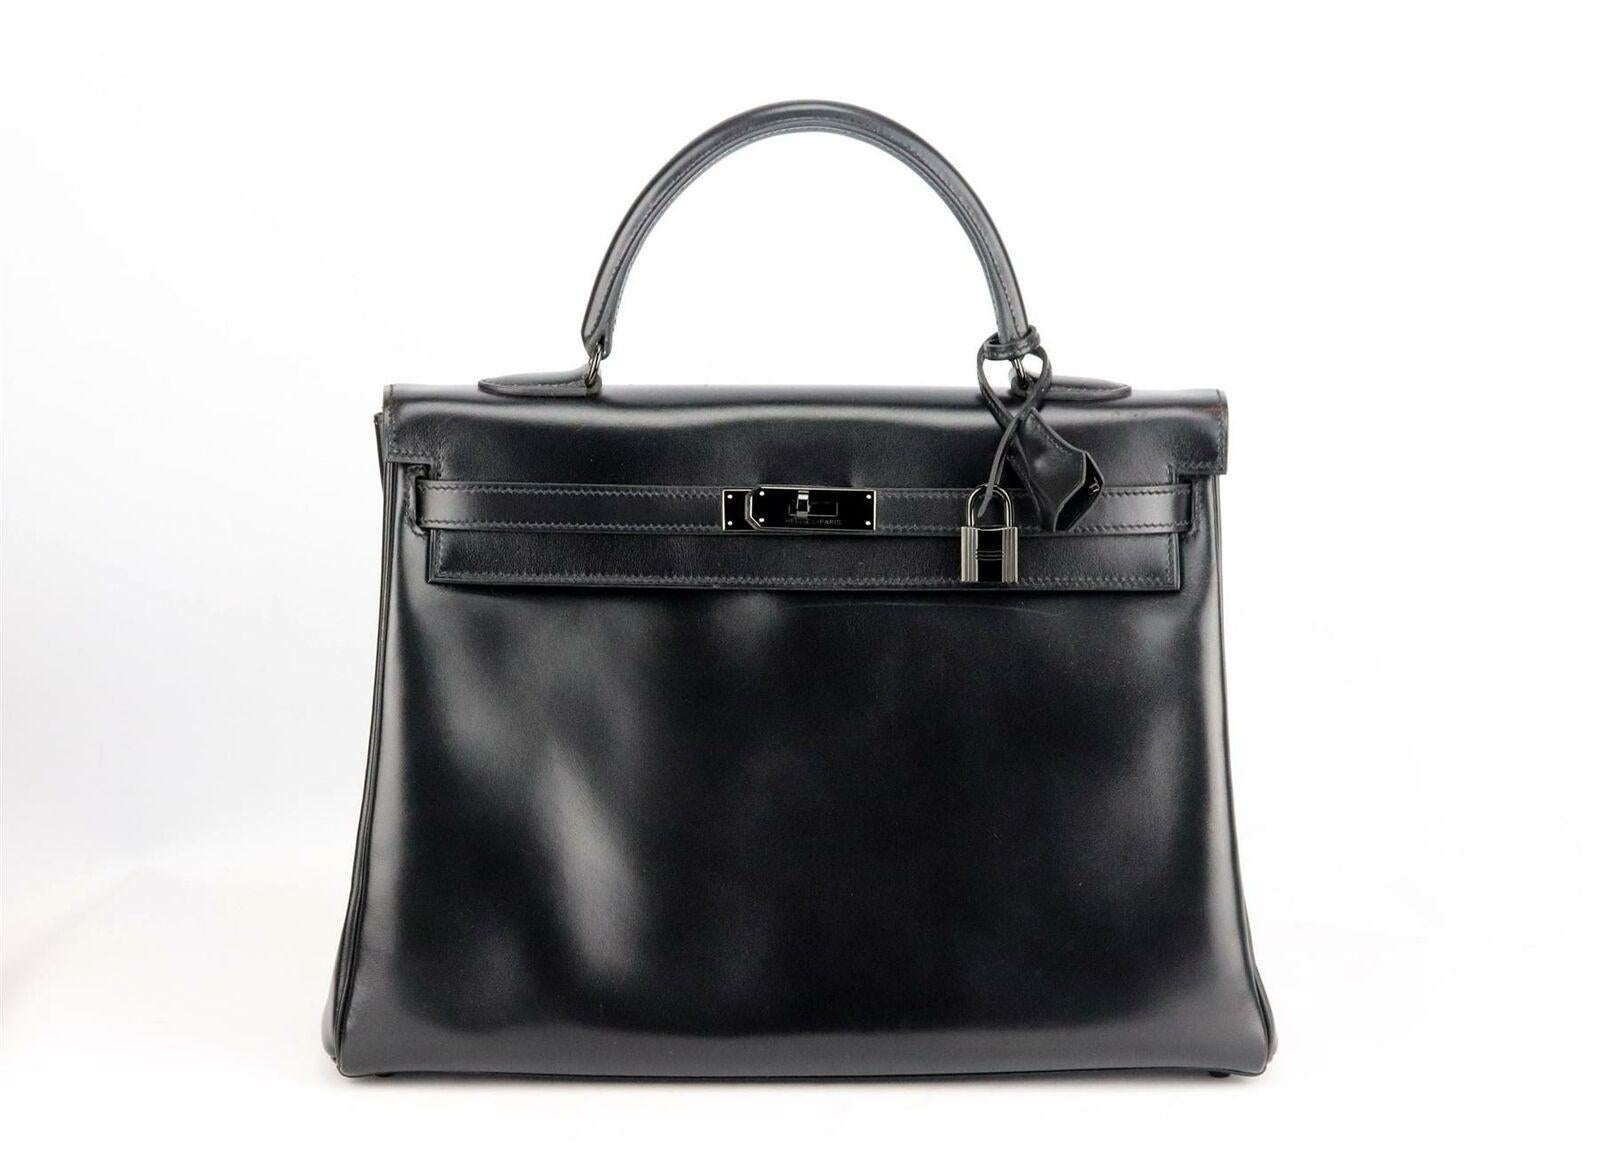 Made in France, this beautiful 2011 Hermès ‘Kelly’ 35cm ‘So Black’ handbag has been made from smooth black Calf leather exterior in ‘black’ and matching leather interior, this piece is decorated with black ruthenium hardware on the front and